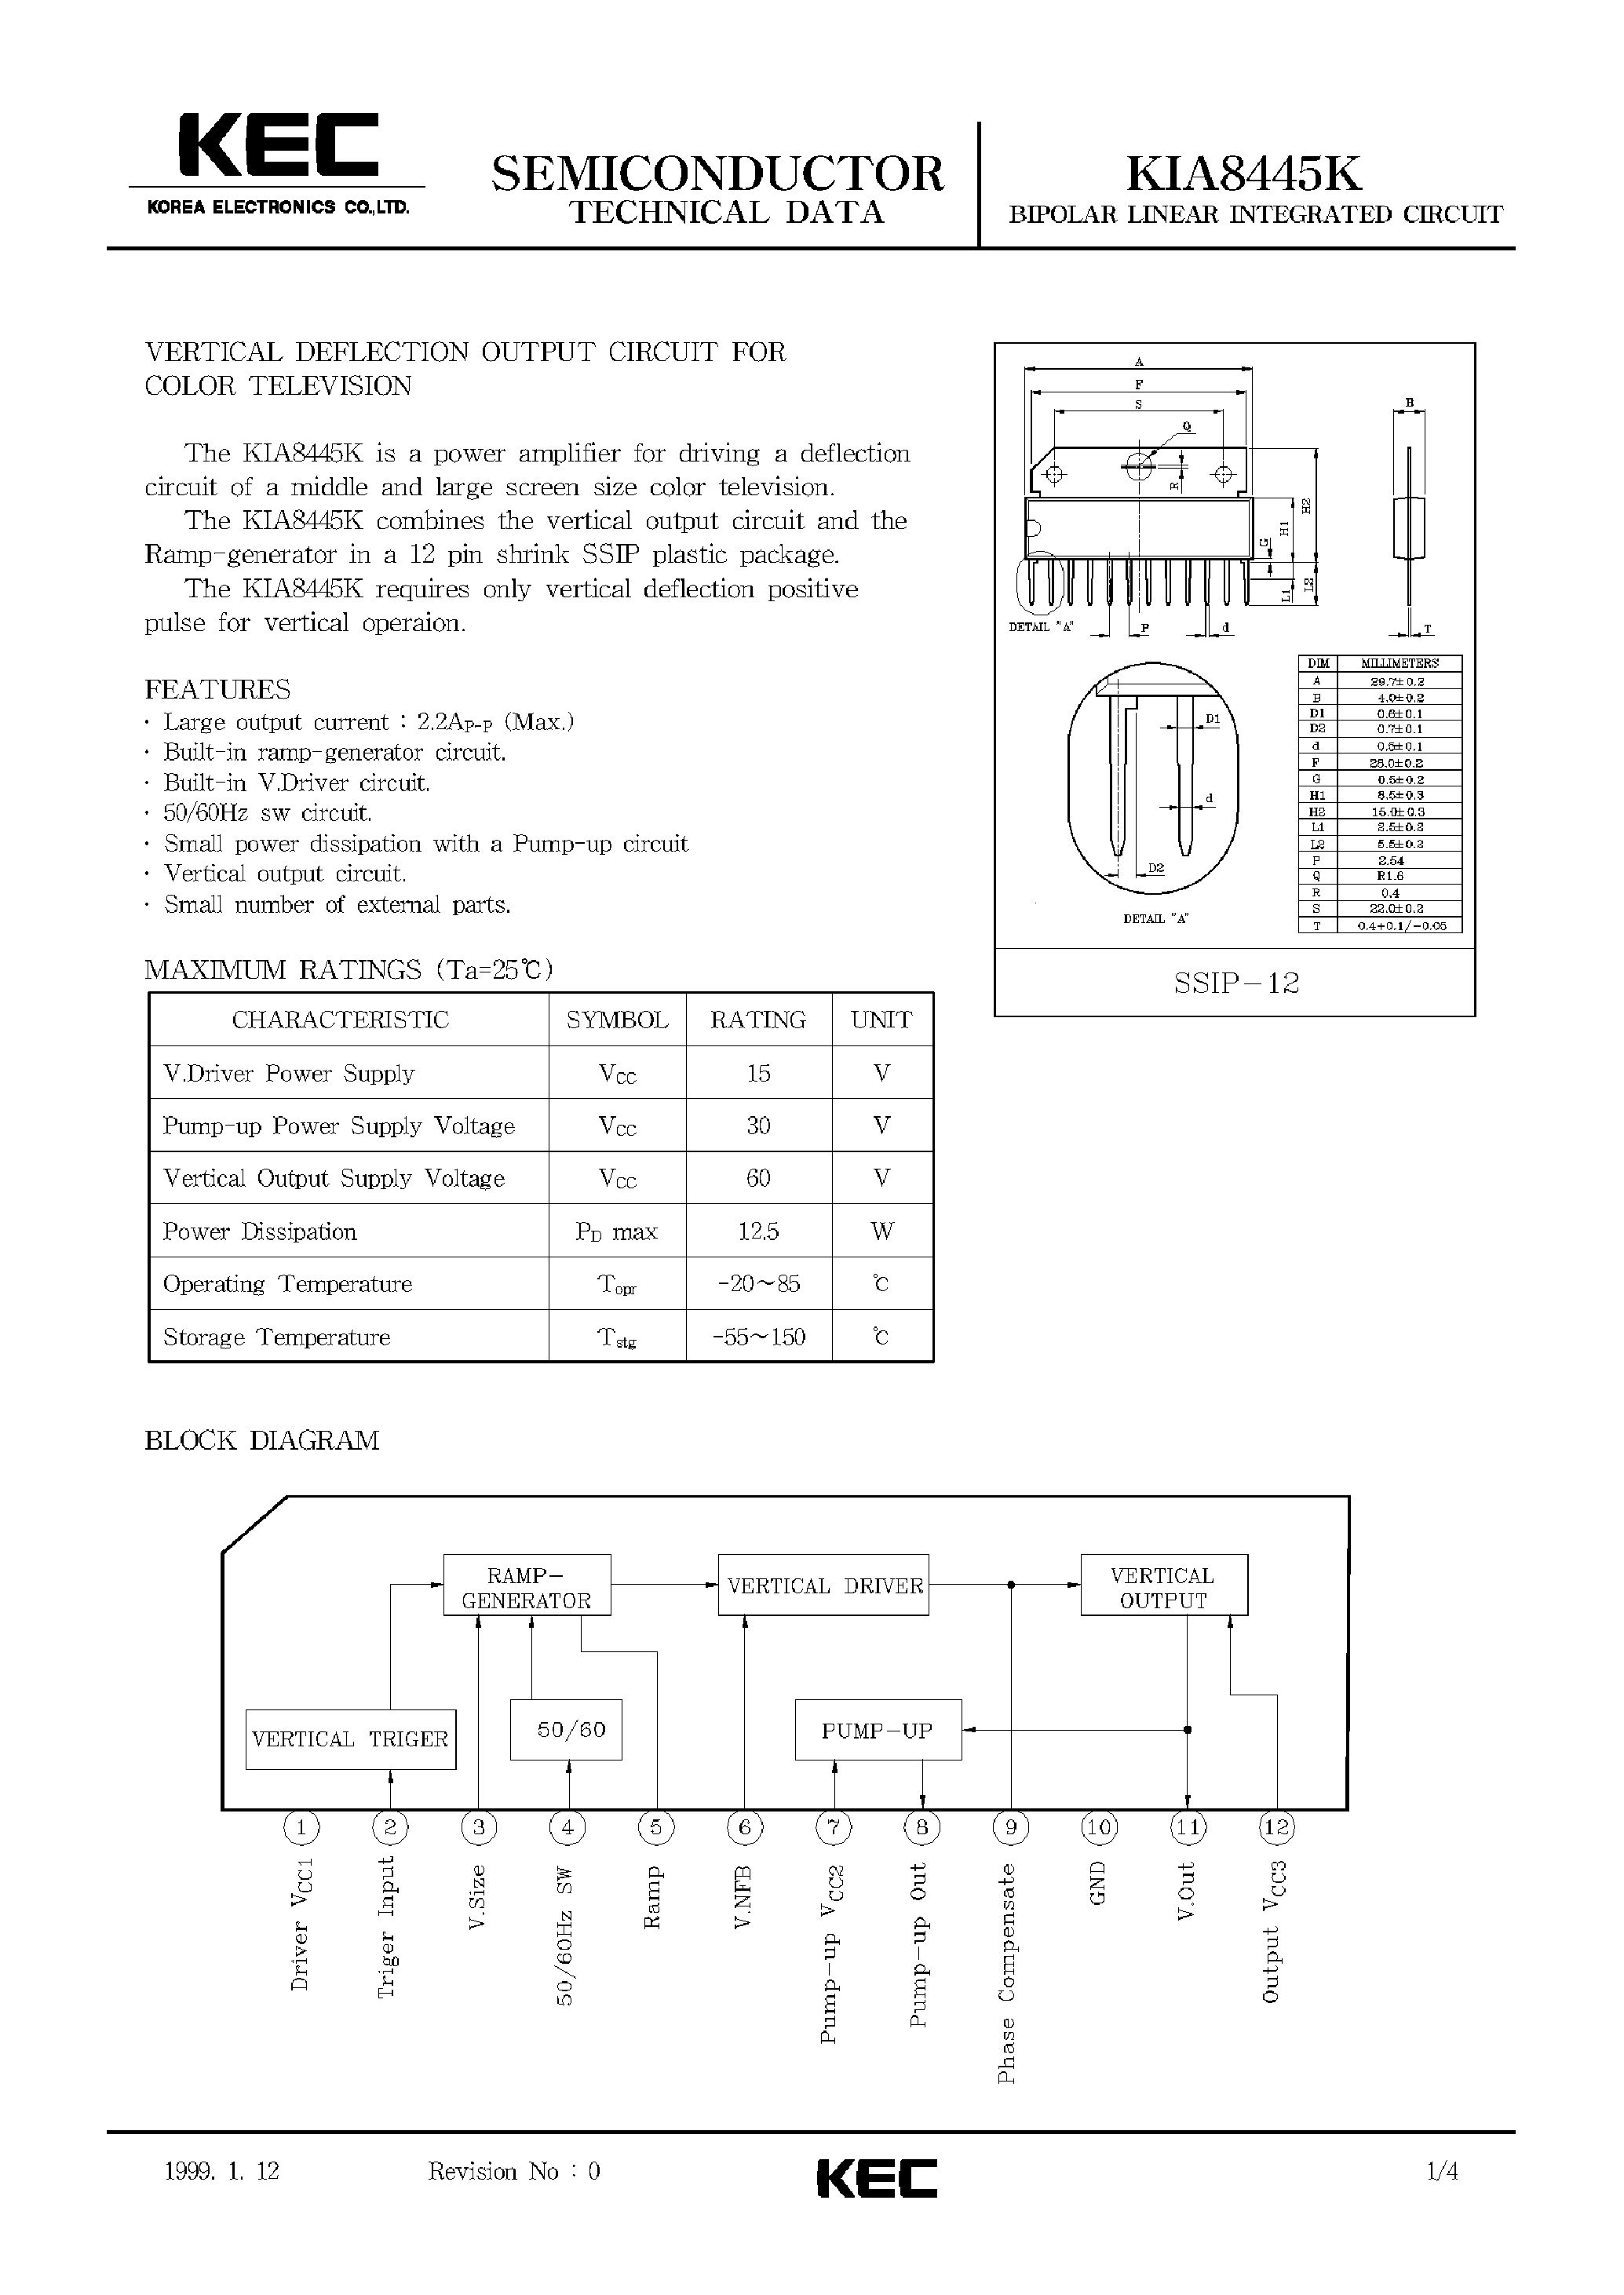 Datasheet KIA8445K - BIPOLAR LINEAR INTEGRATED CIRCUIT (VERTICAL DEFLECTION OUTPUT CIRCUIT FOR COLOR TELEVISION) page 1